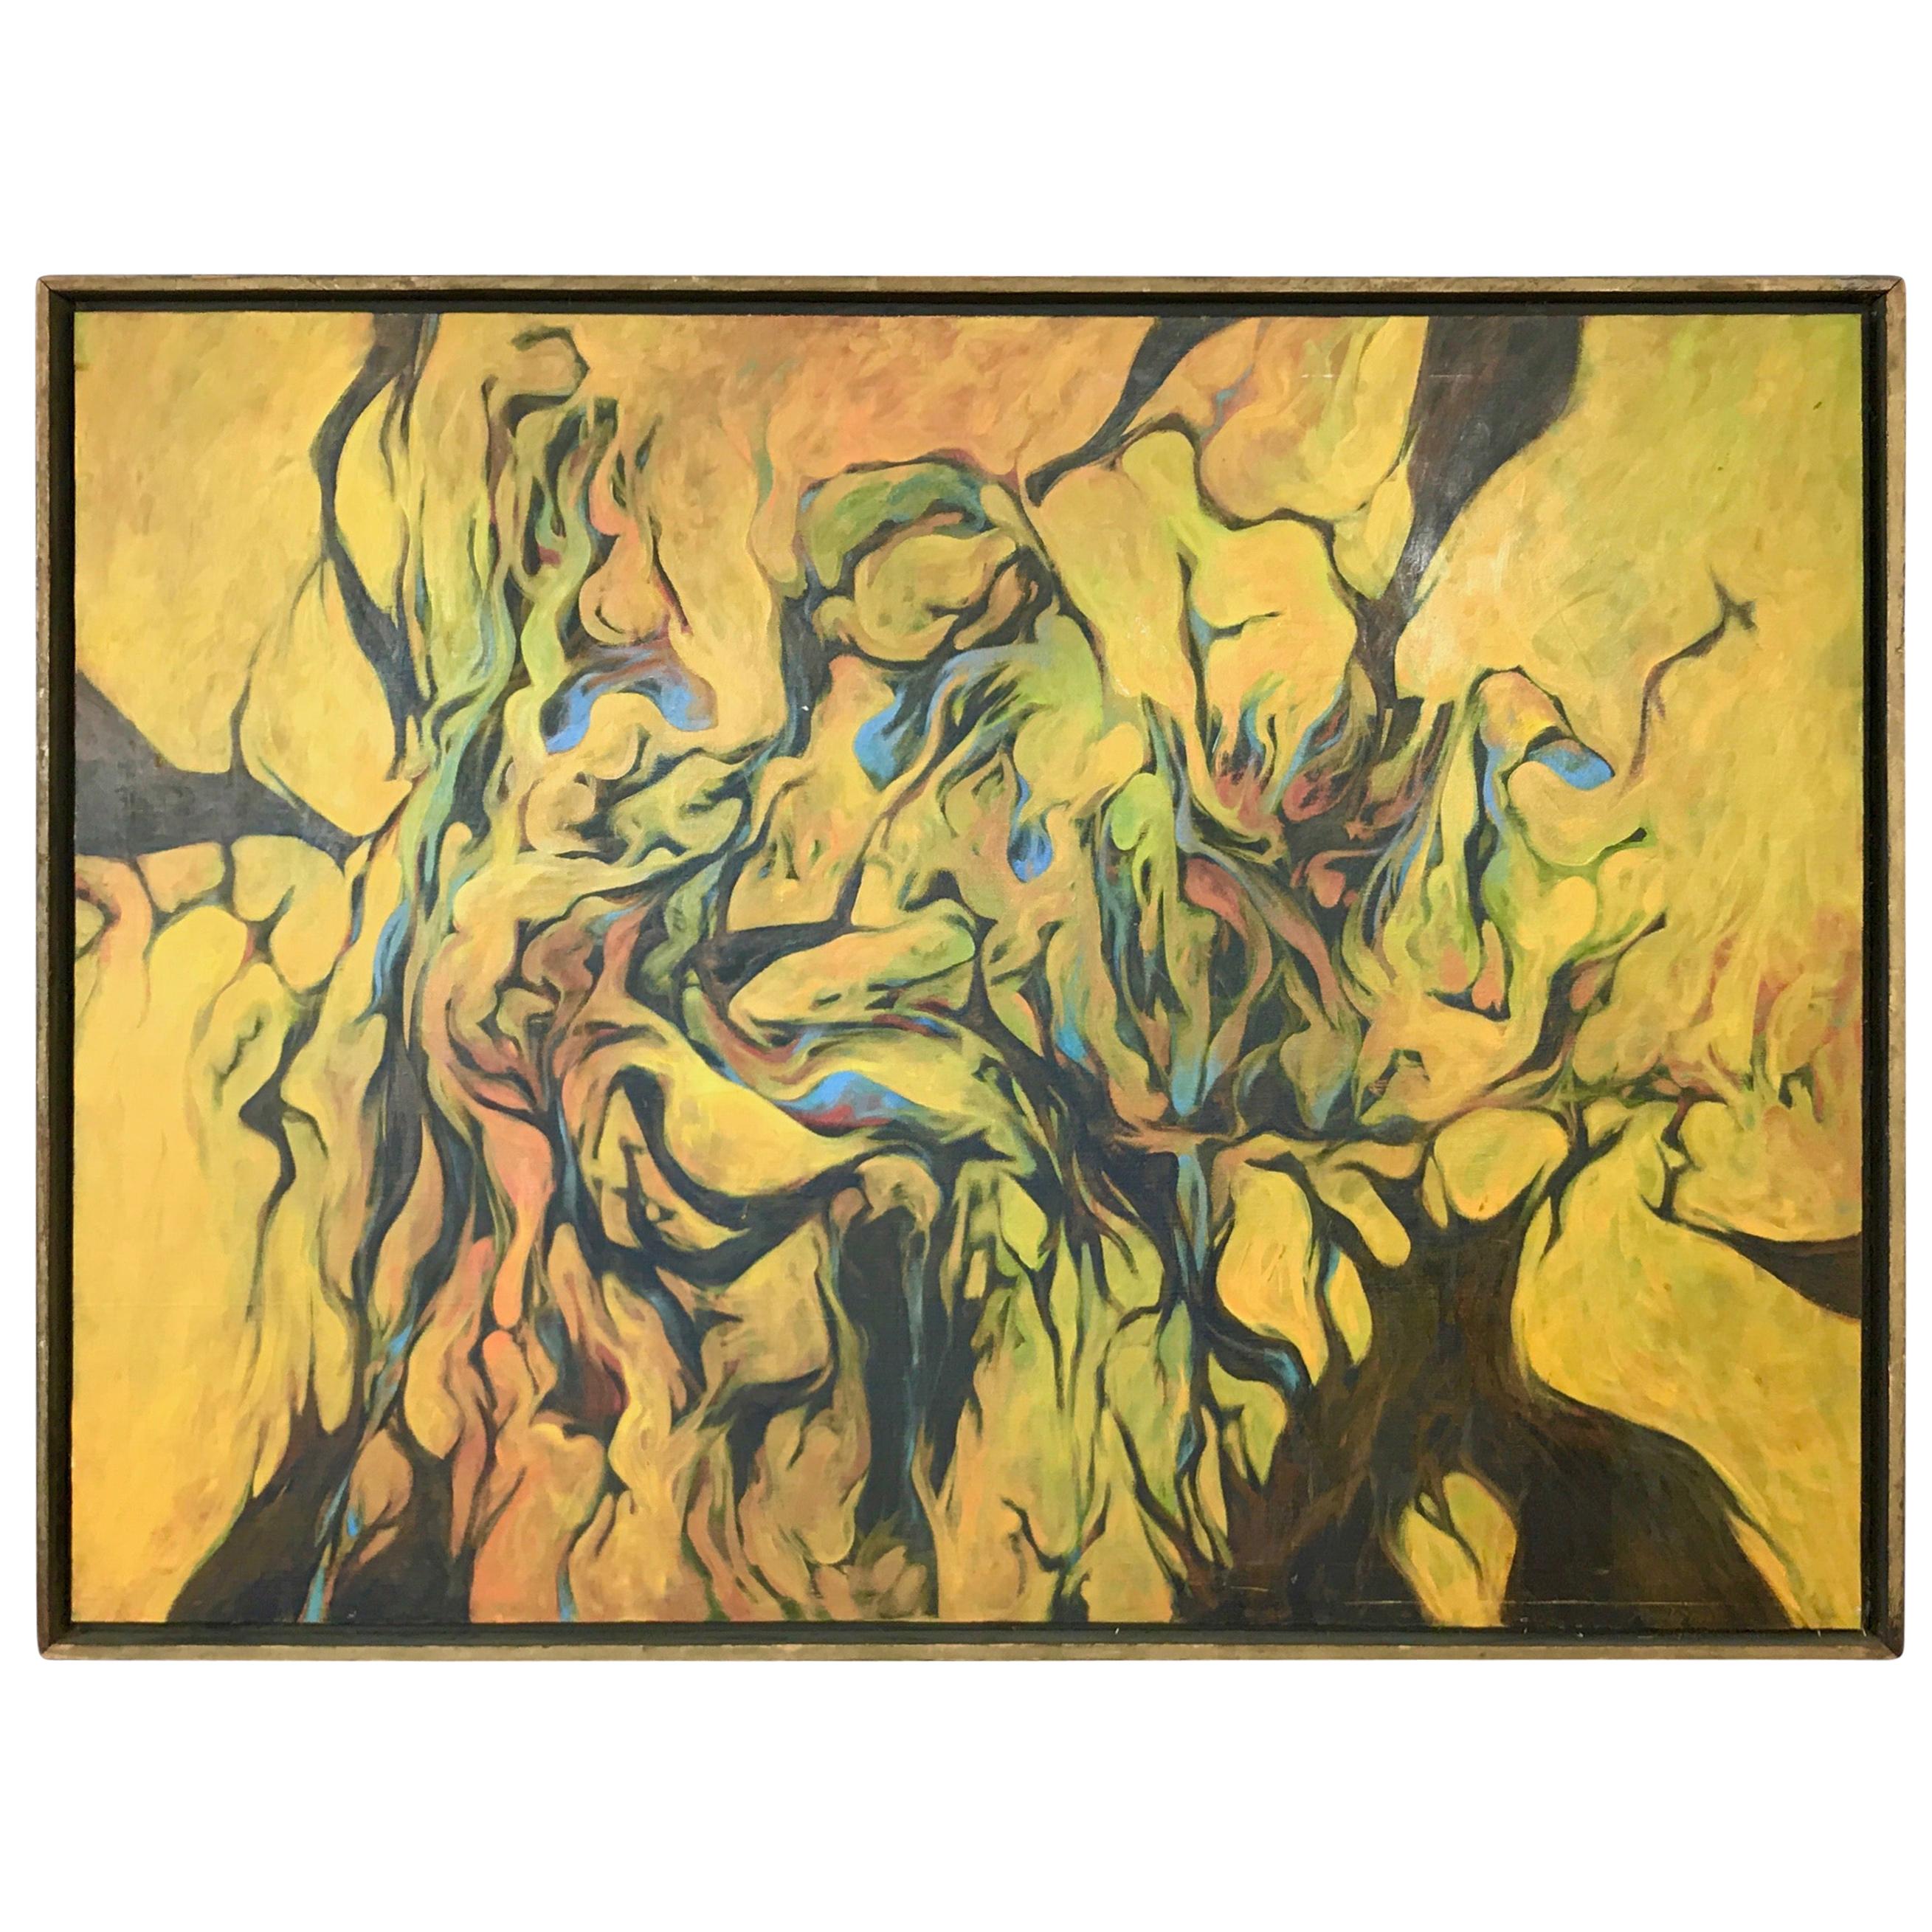 Ron Ownbey “Untitled” Large Abstract Impressionist Oil Painting, 1962